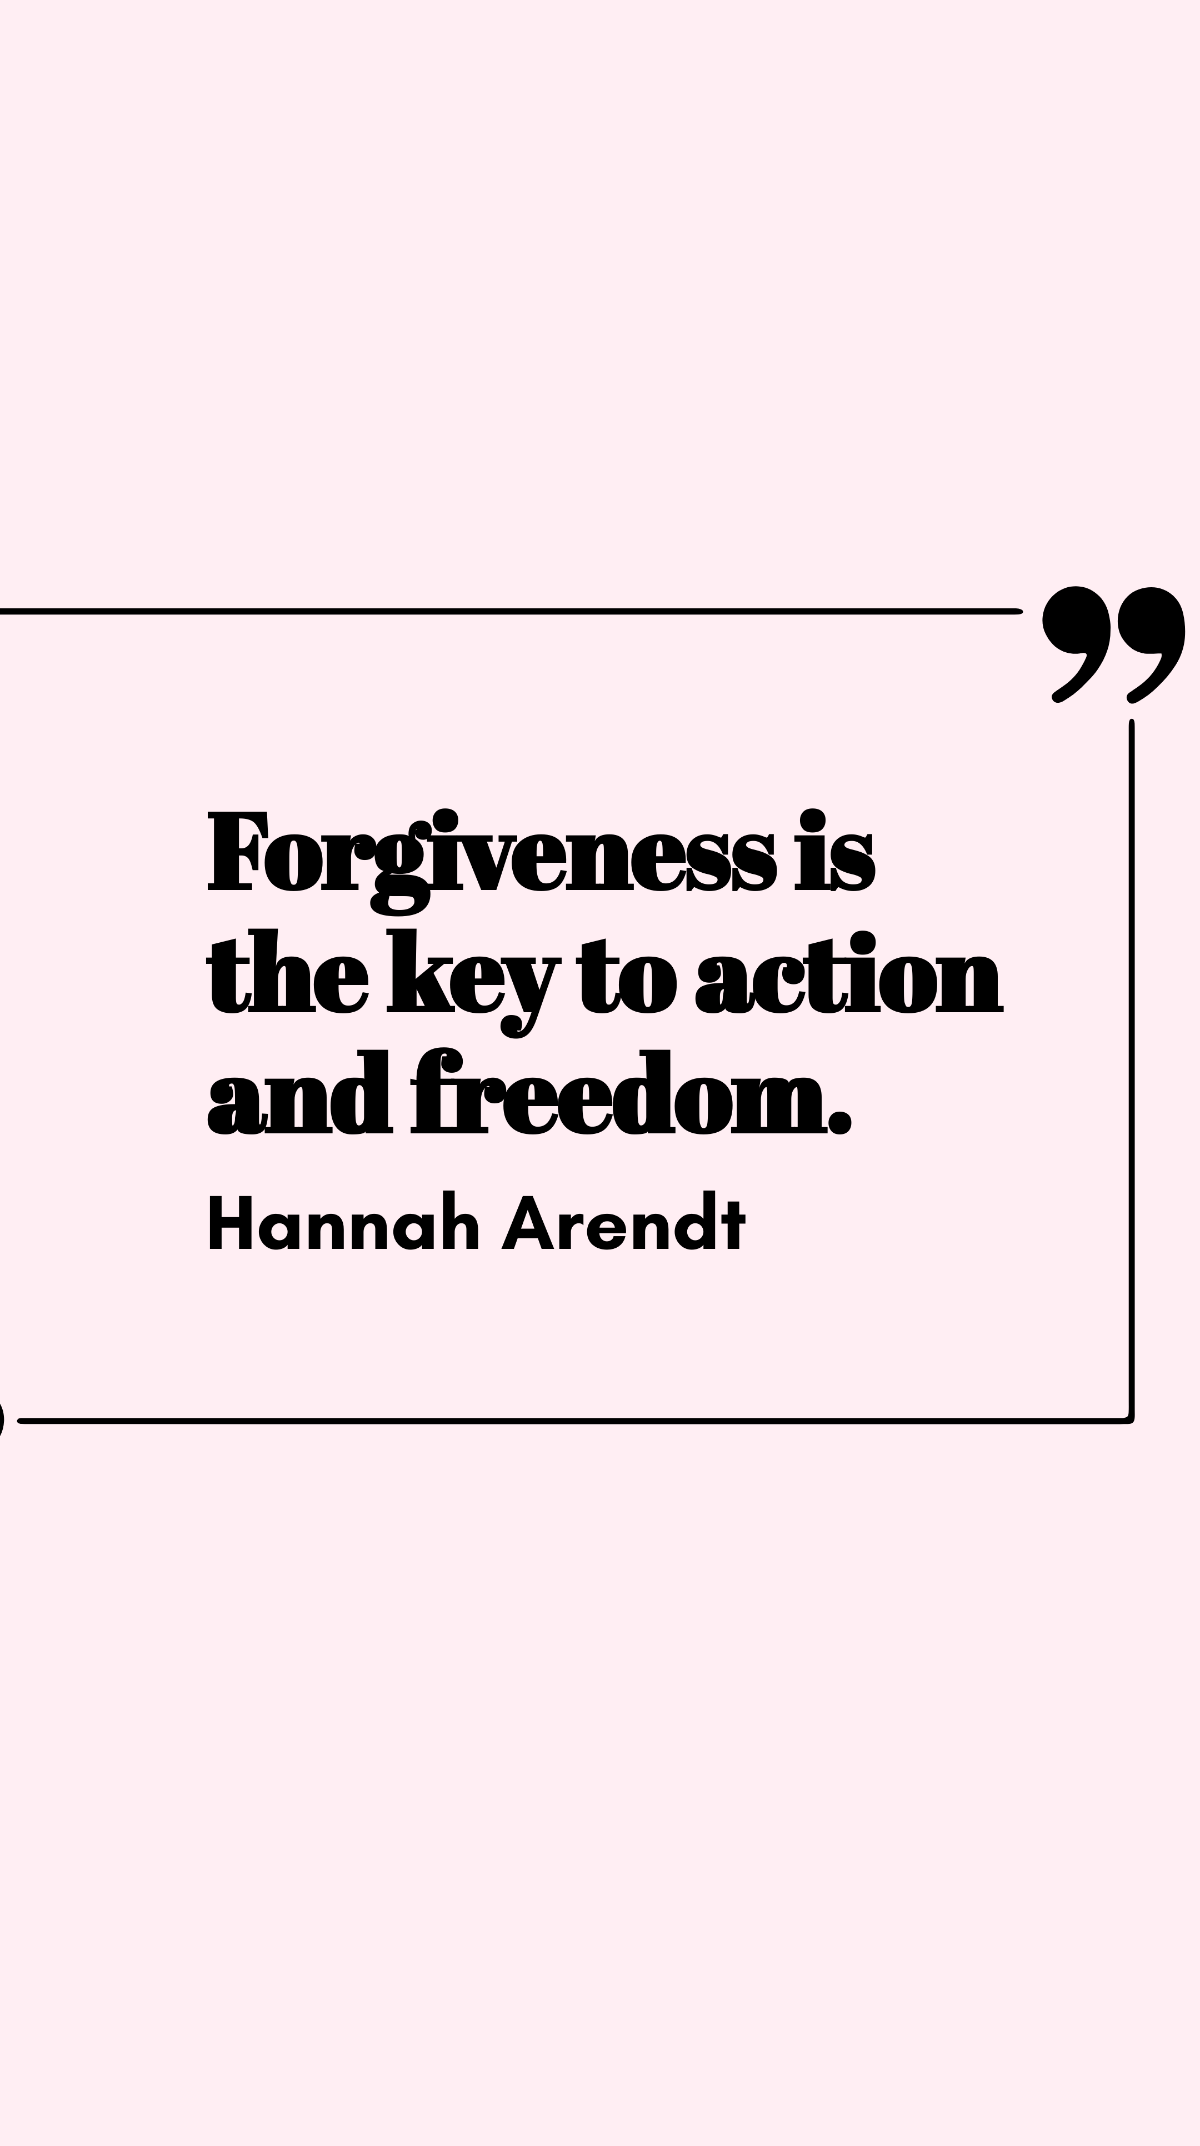 Hannah Arendt - Forgiveness is the key to action and freedom. Template